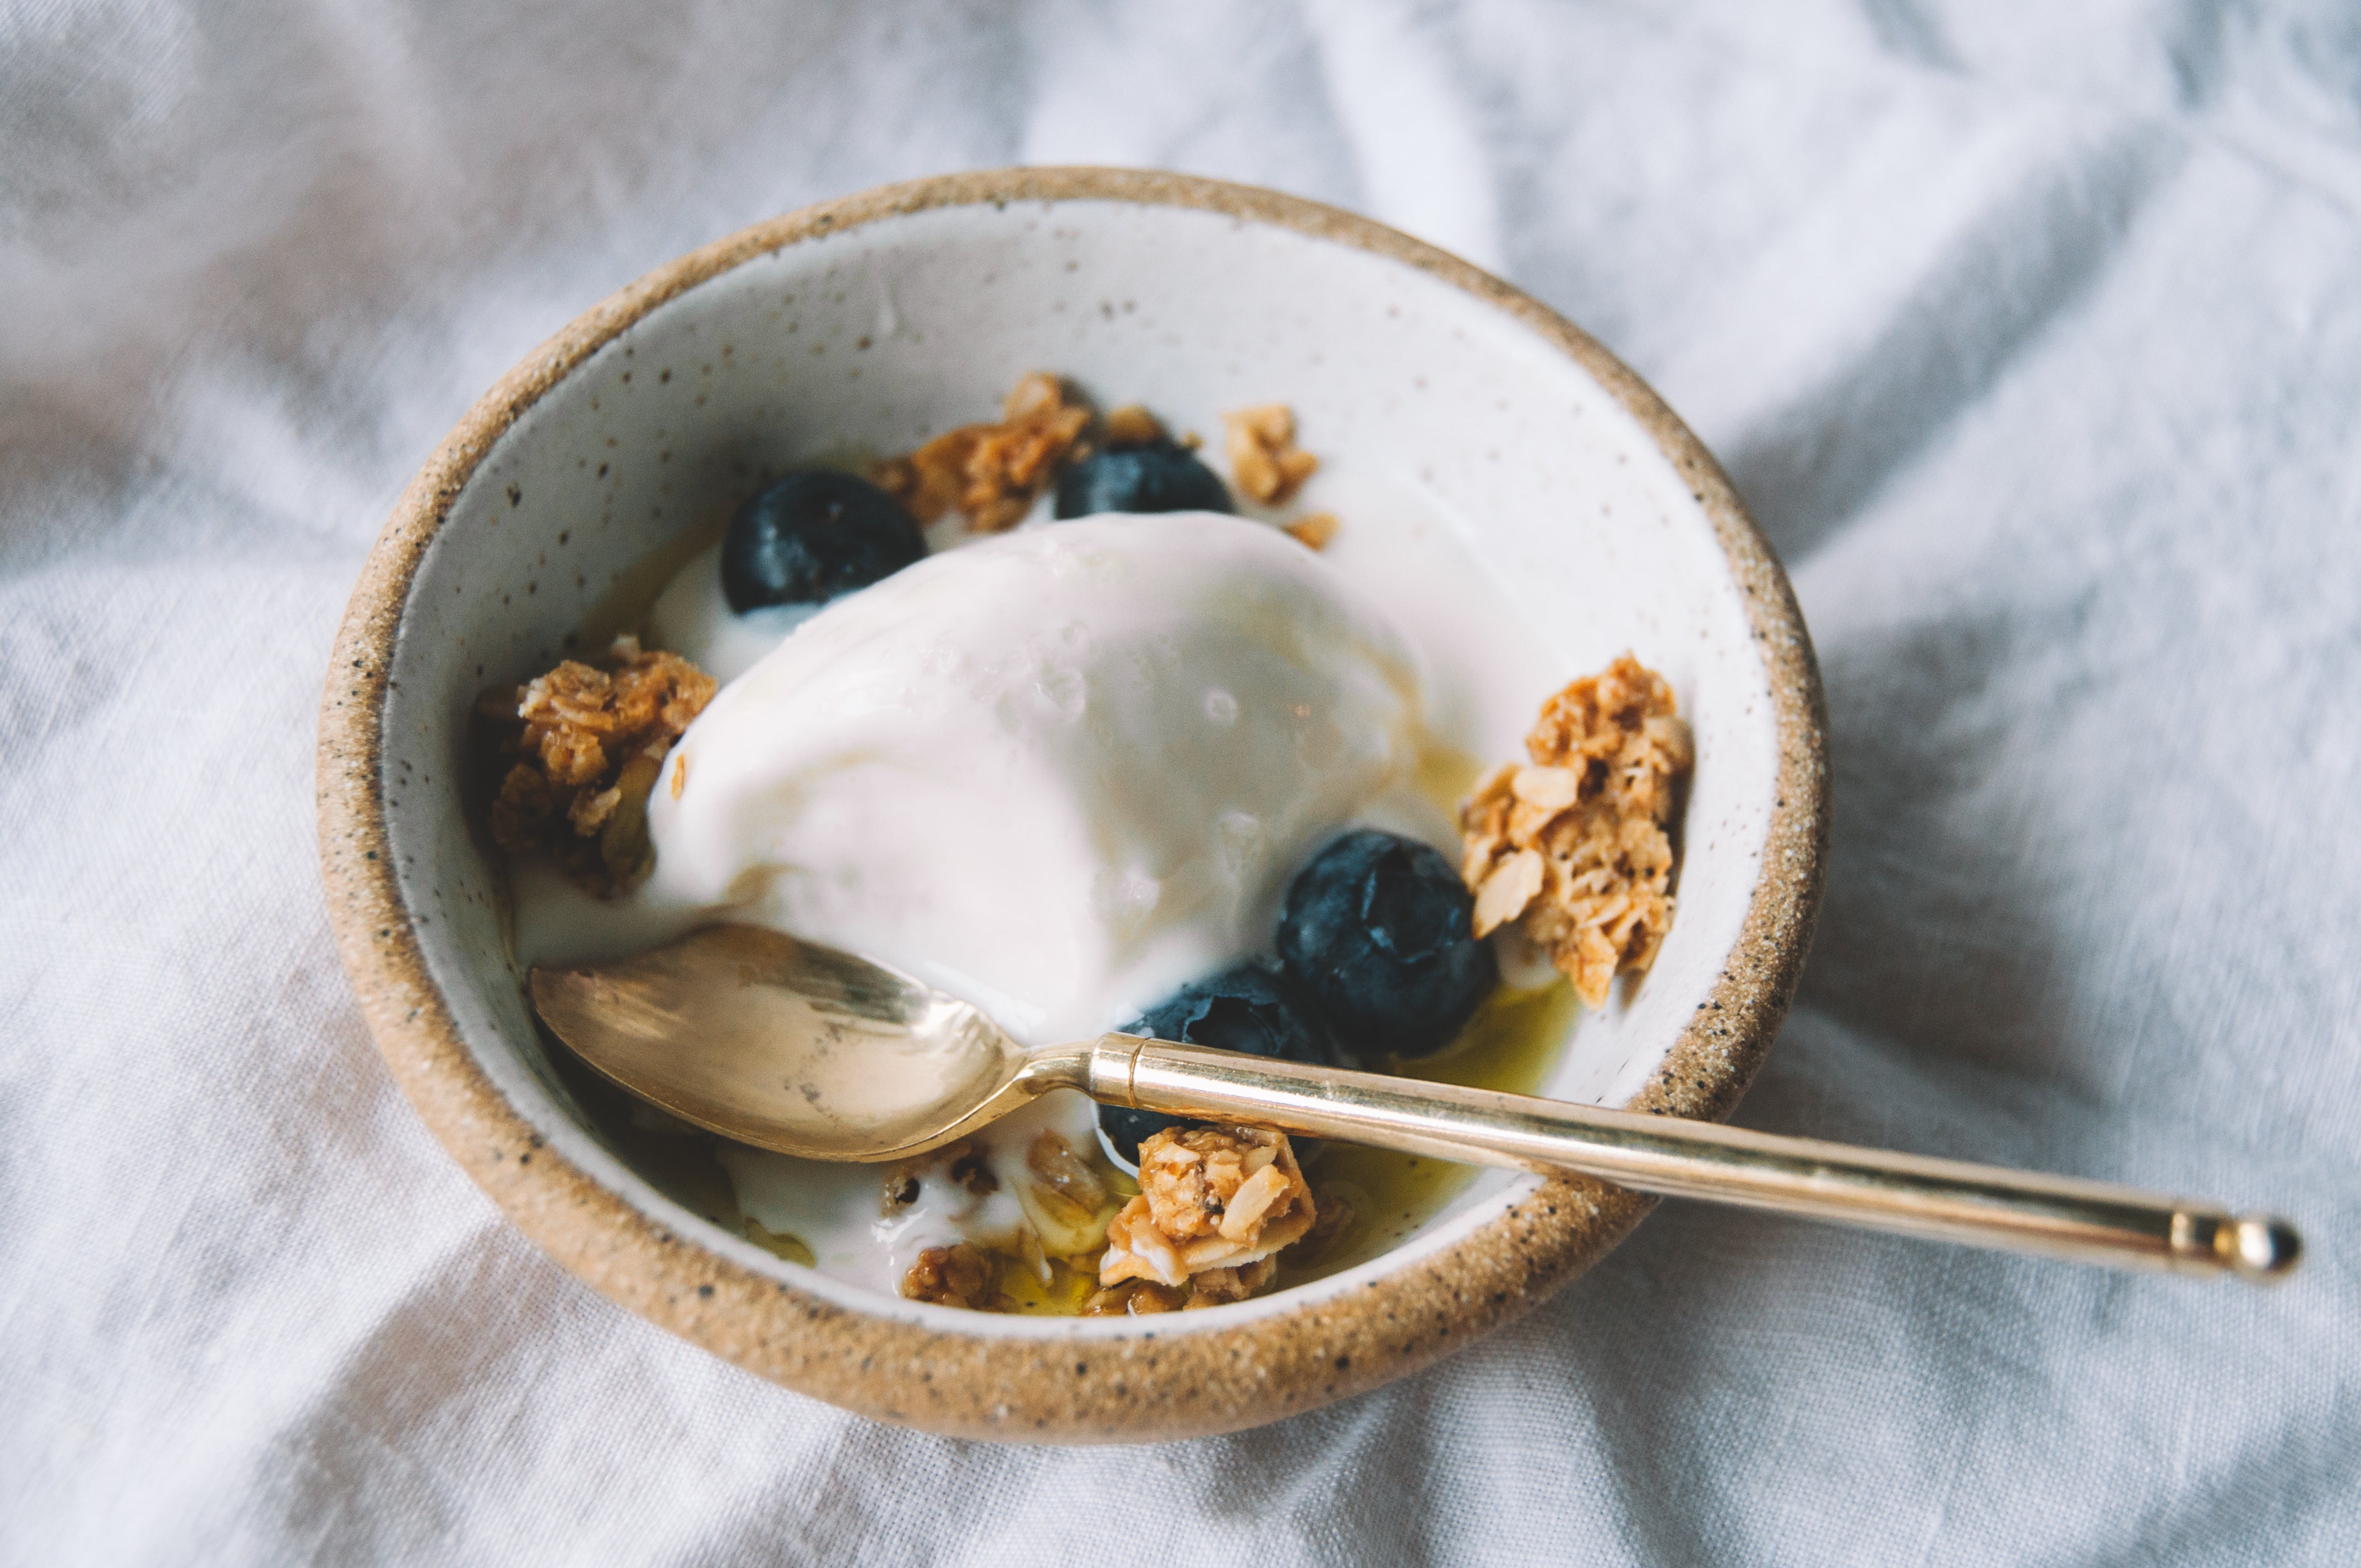 Jamie's Farm Granola - Rosemary with Zante Currants, Gluten-Free, Baked with Grass-fed Ghee, What to do with stale granola - frozen yogurt ice cream summer recipe honey sea salt olive oil